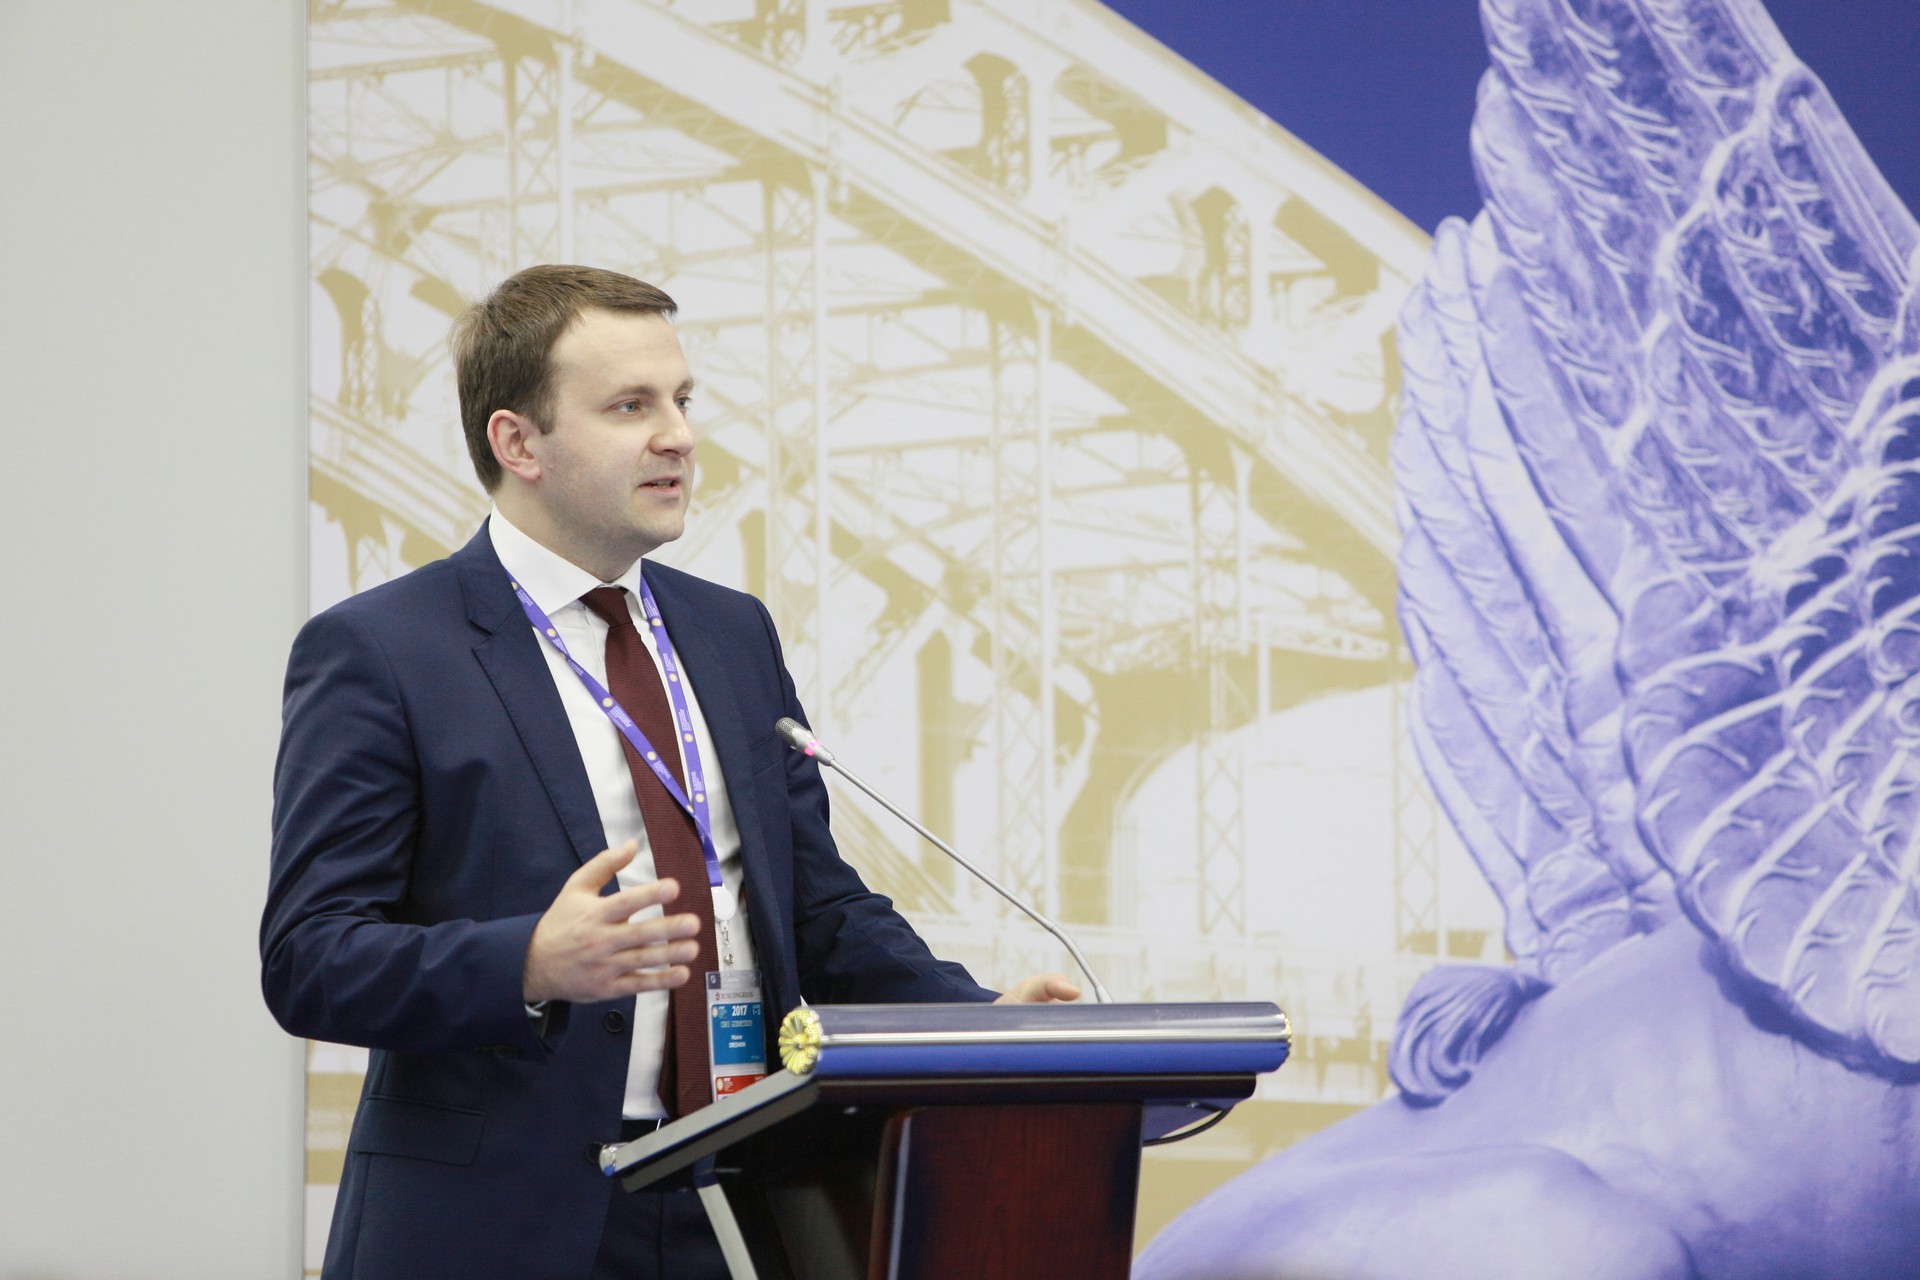 Minister for Economic Development of the Russian Federation Maxim Oreshkin to discuss investment opportunities in Russian production at Russia House in Davos